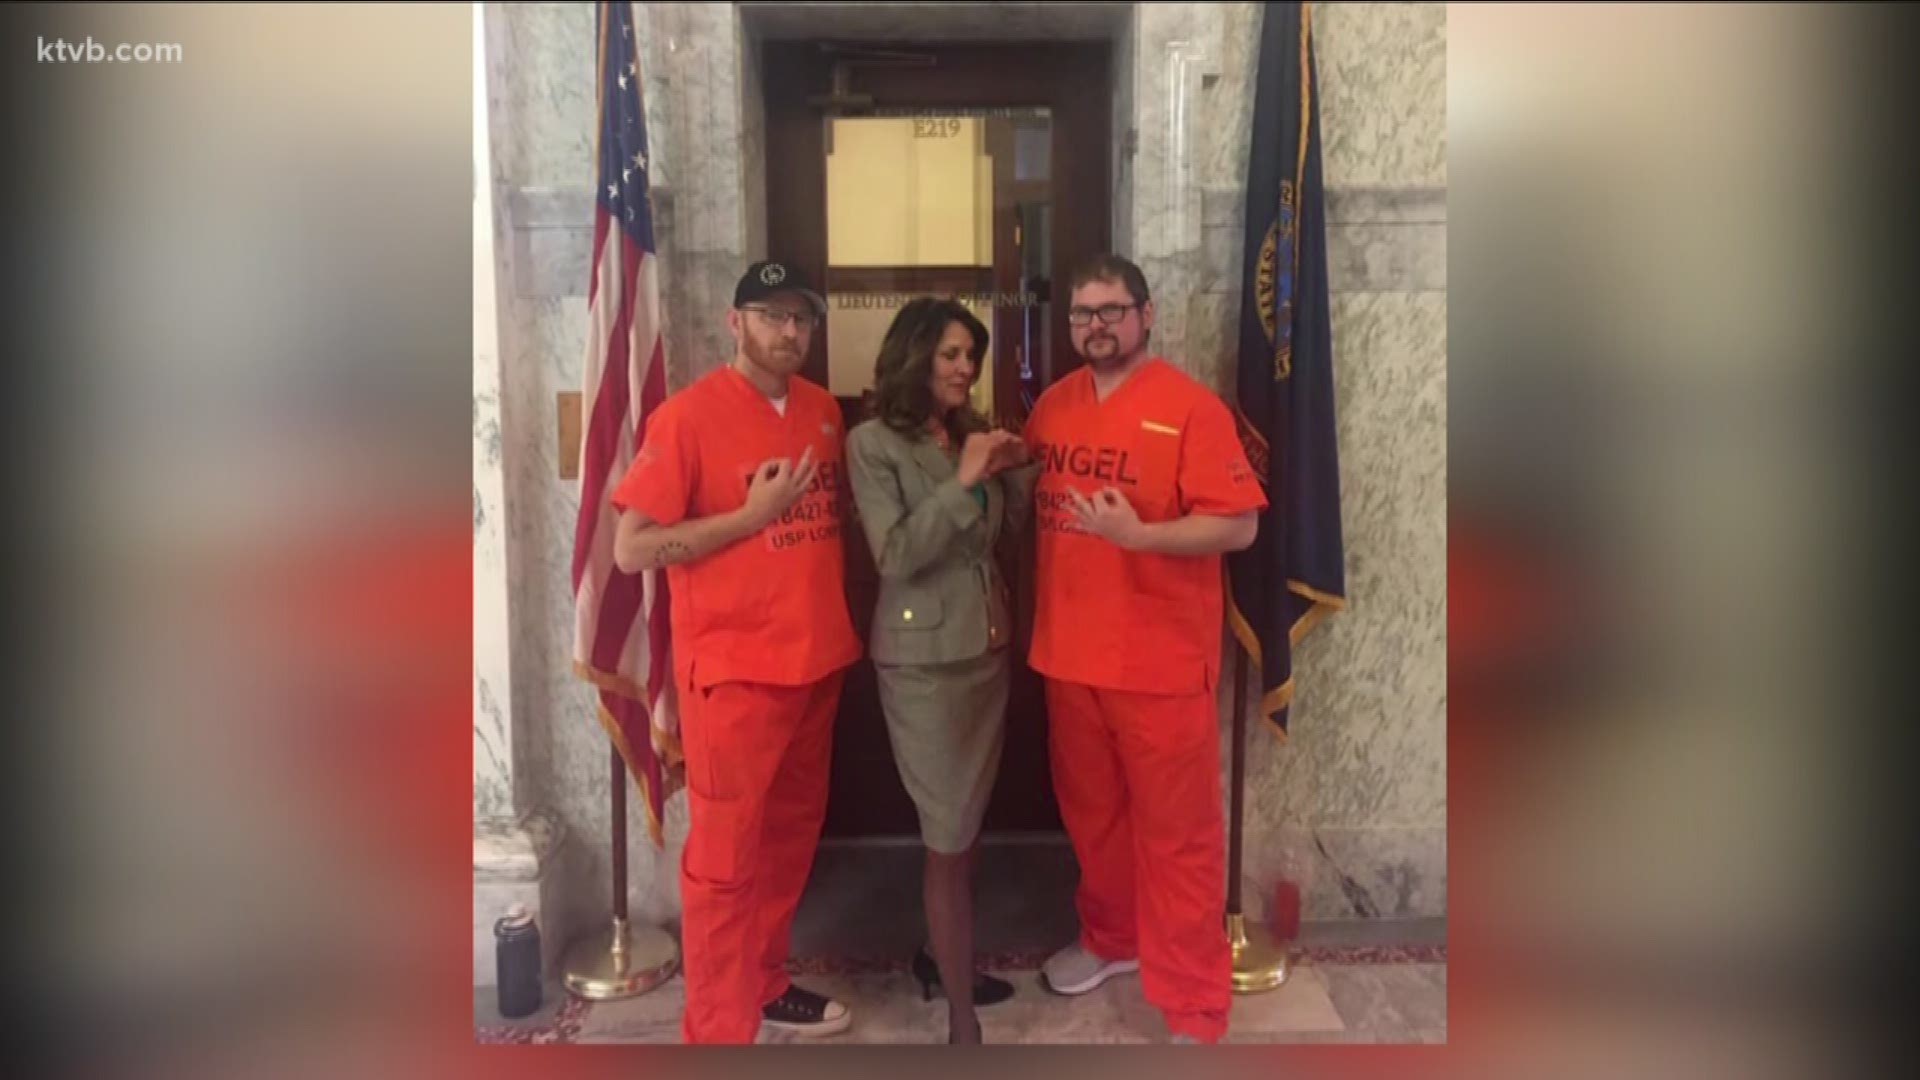 Janice McGeachin is shown posing with two men in prison garb.